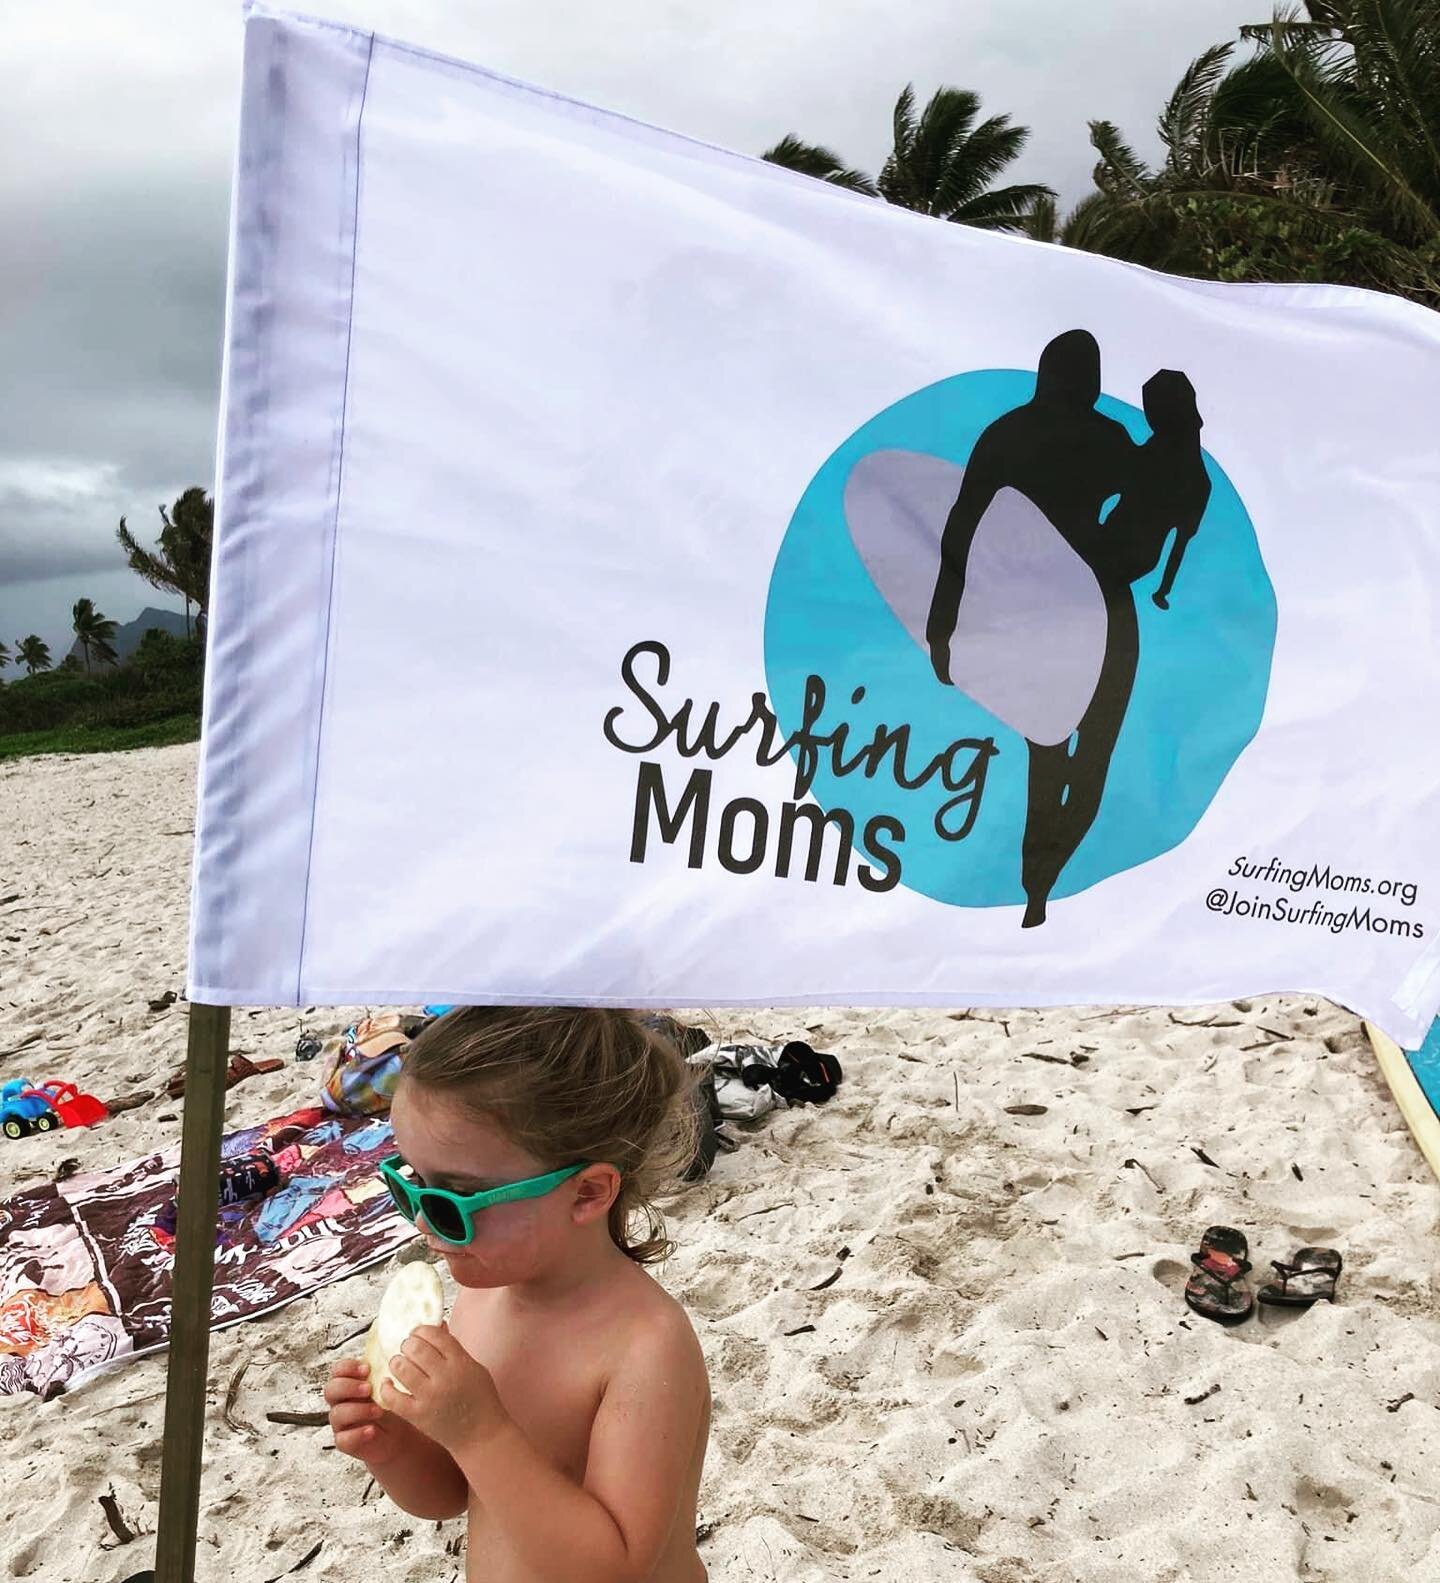 All out meet ups will have a flag up so it&rsquo;s easy to spot us! #SurfingMoms